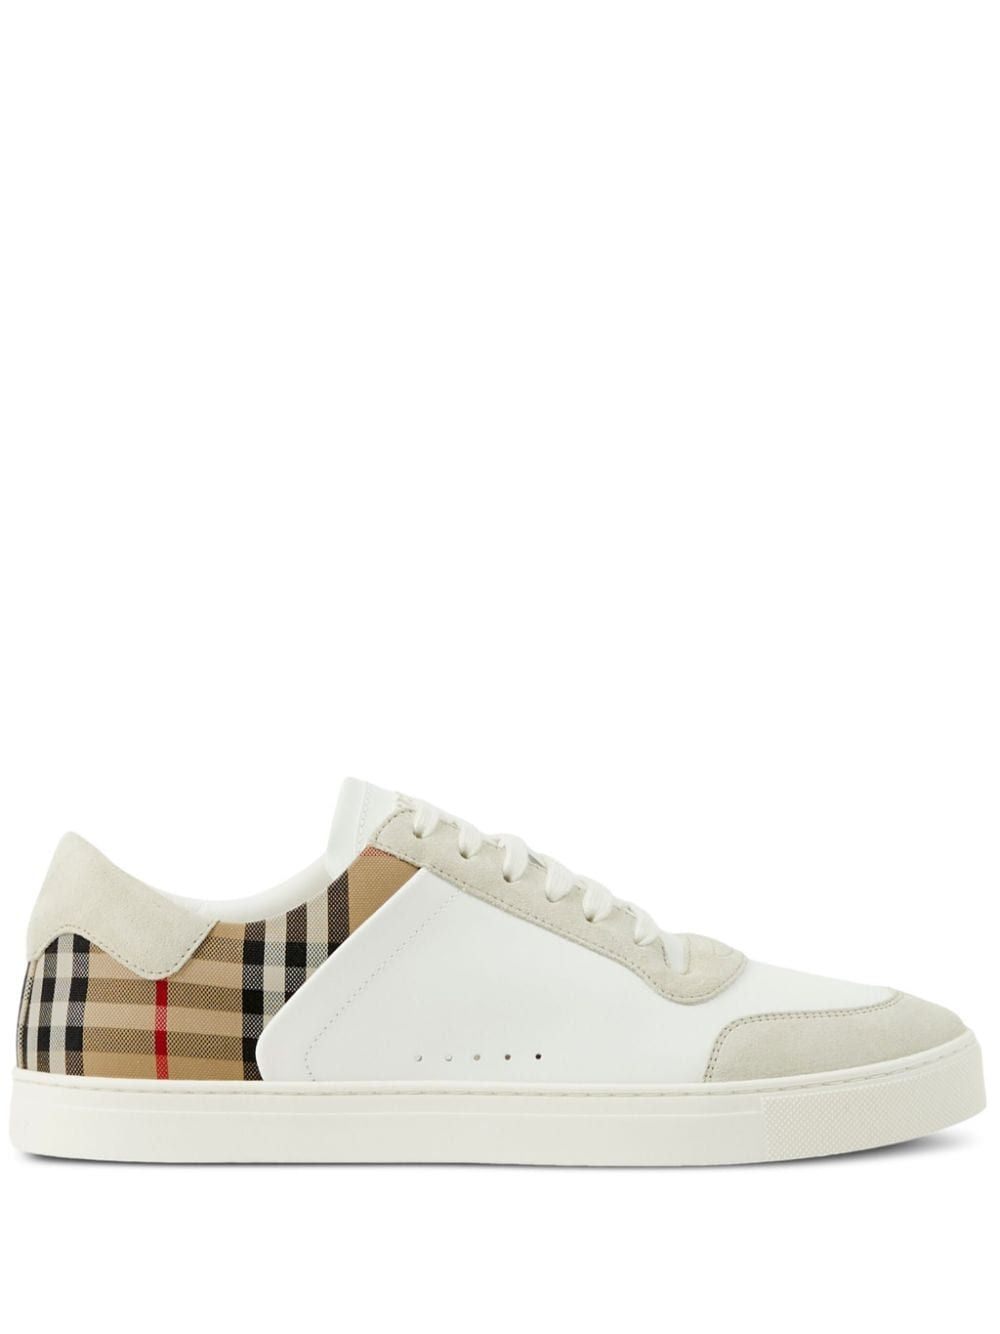 Shop Burberry Classic White Leather Sneakers For Men